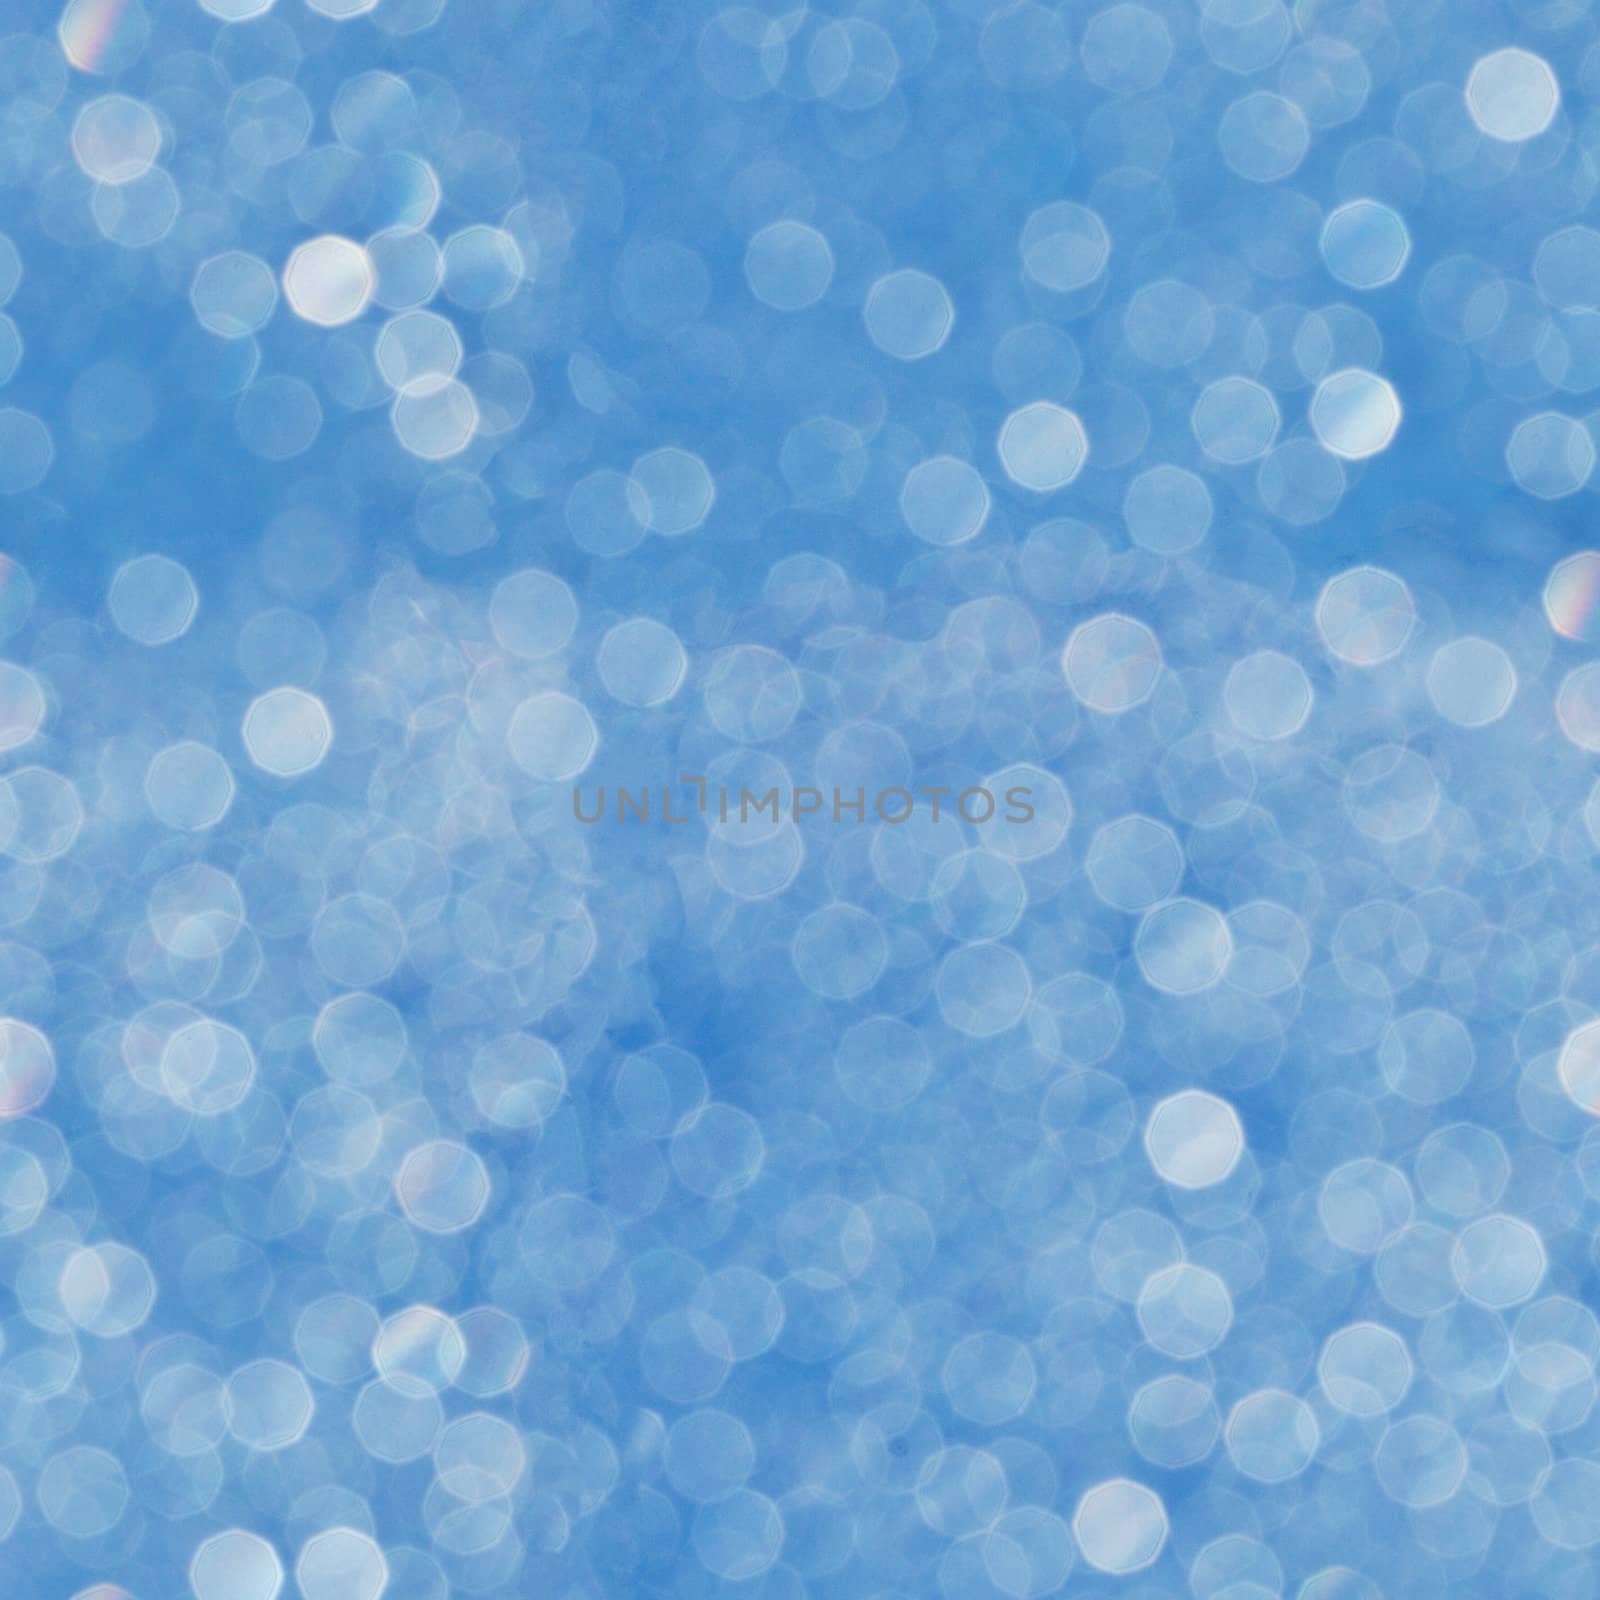 Sparkling abstract blurred seamless texture by pzaxe